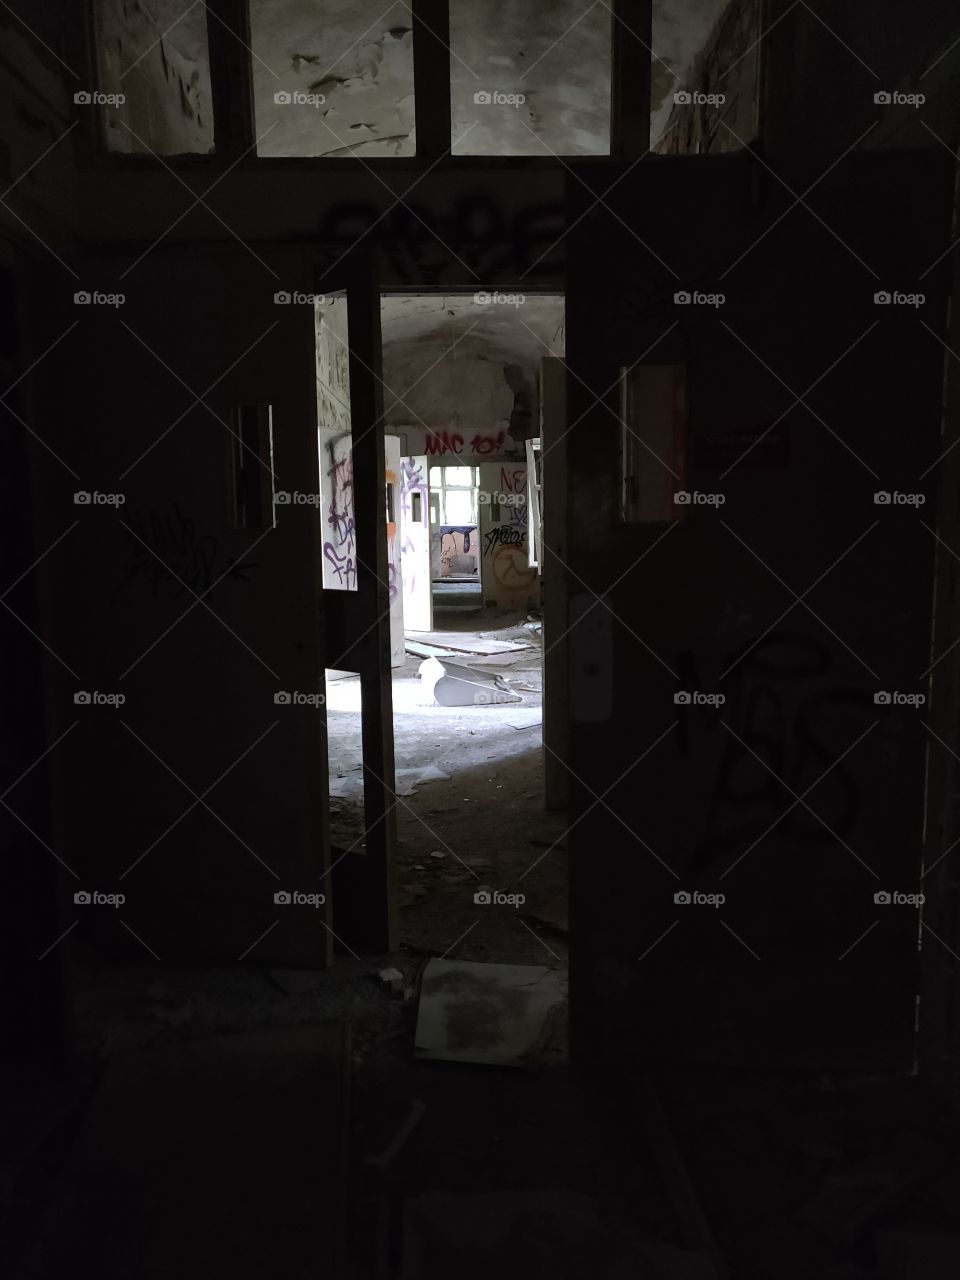 A picture of the abounded mental hospital located in Säter, Sweden.. This dark and mildly scary photo show us a small glimpse of the harsh past for the people that had lived there. Abounded in 1970 but yet still stands almost 50 years later..